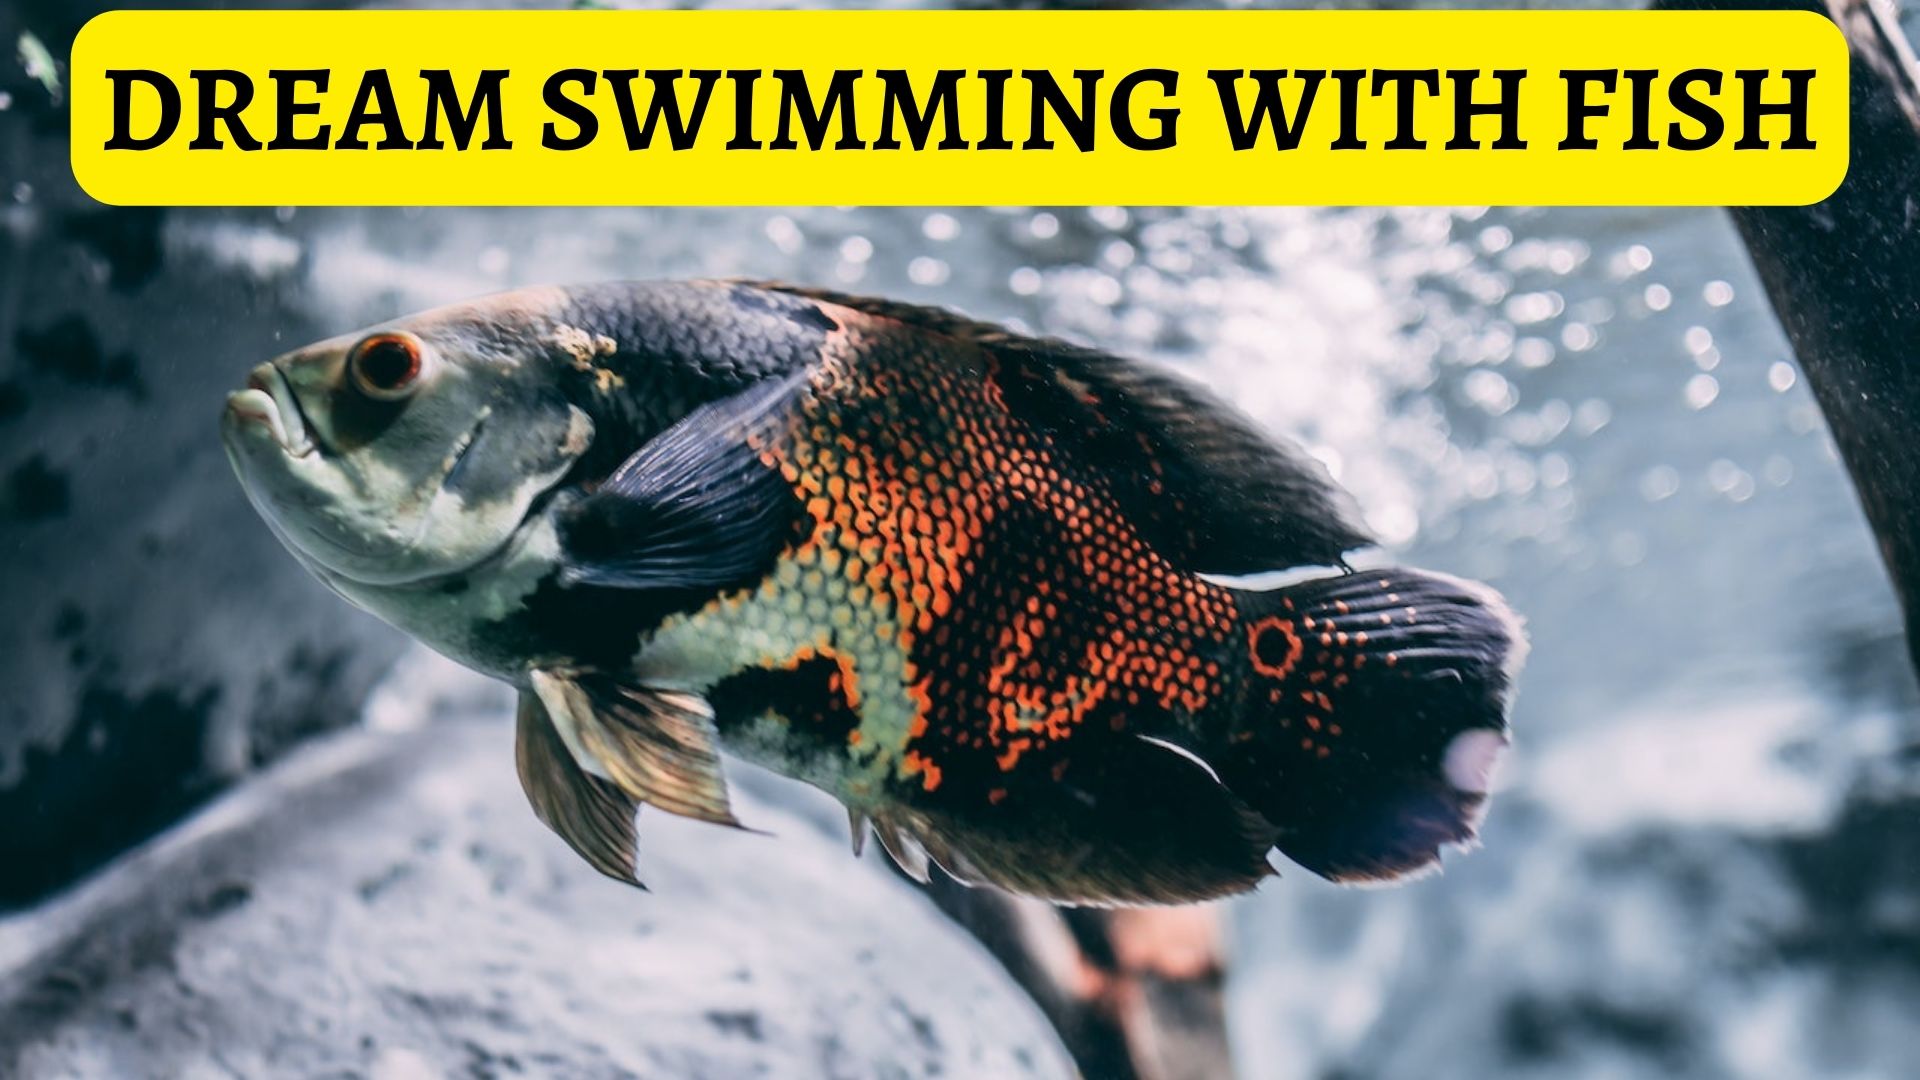 Dream Swimming With Fish - Be Ready For Busy Times